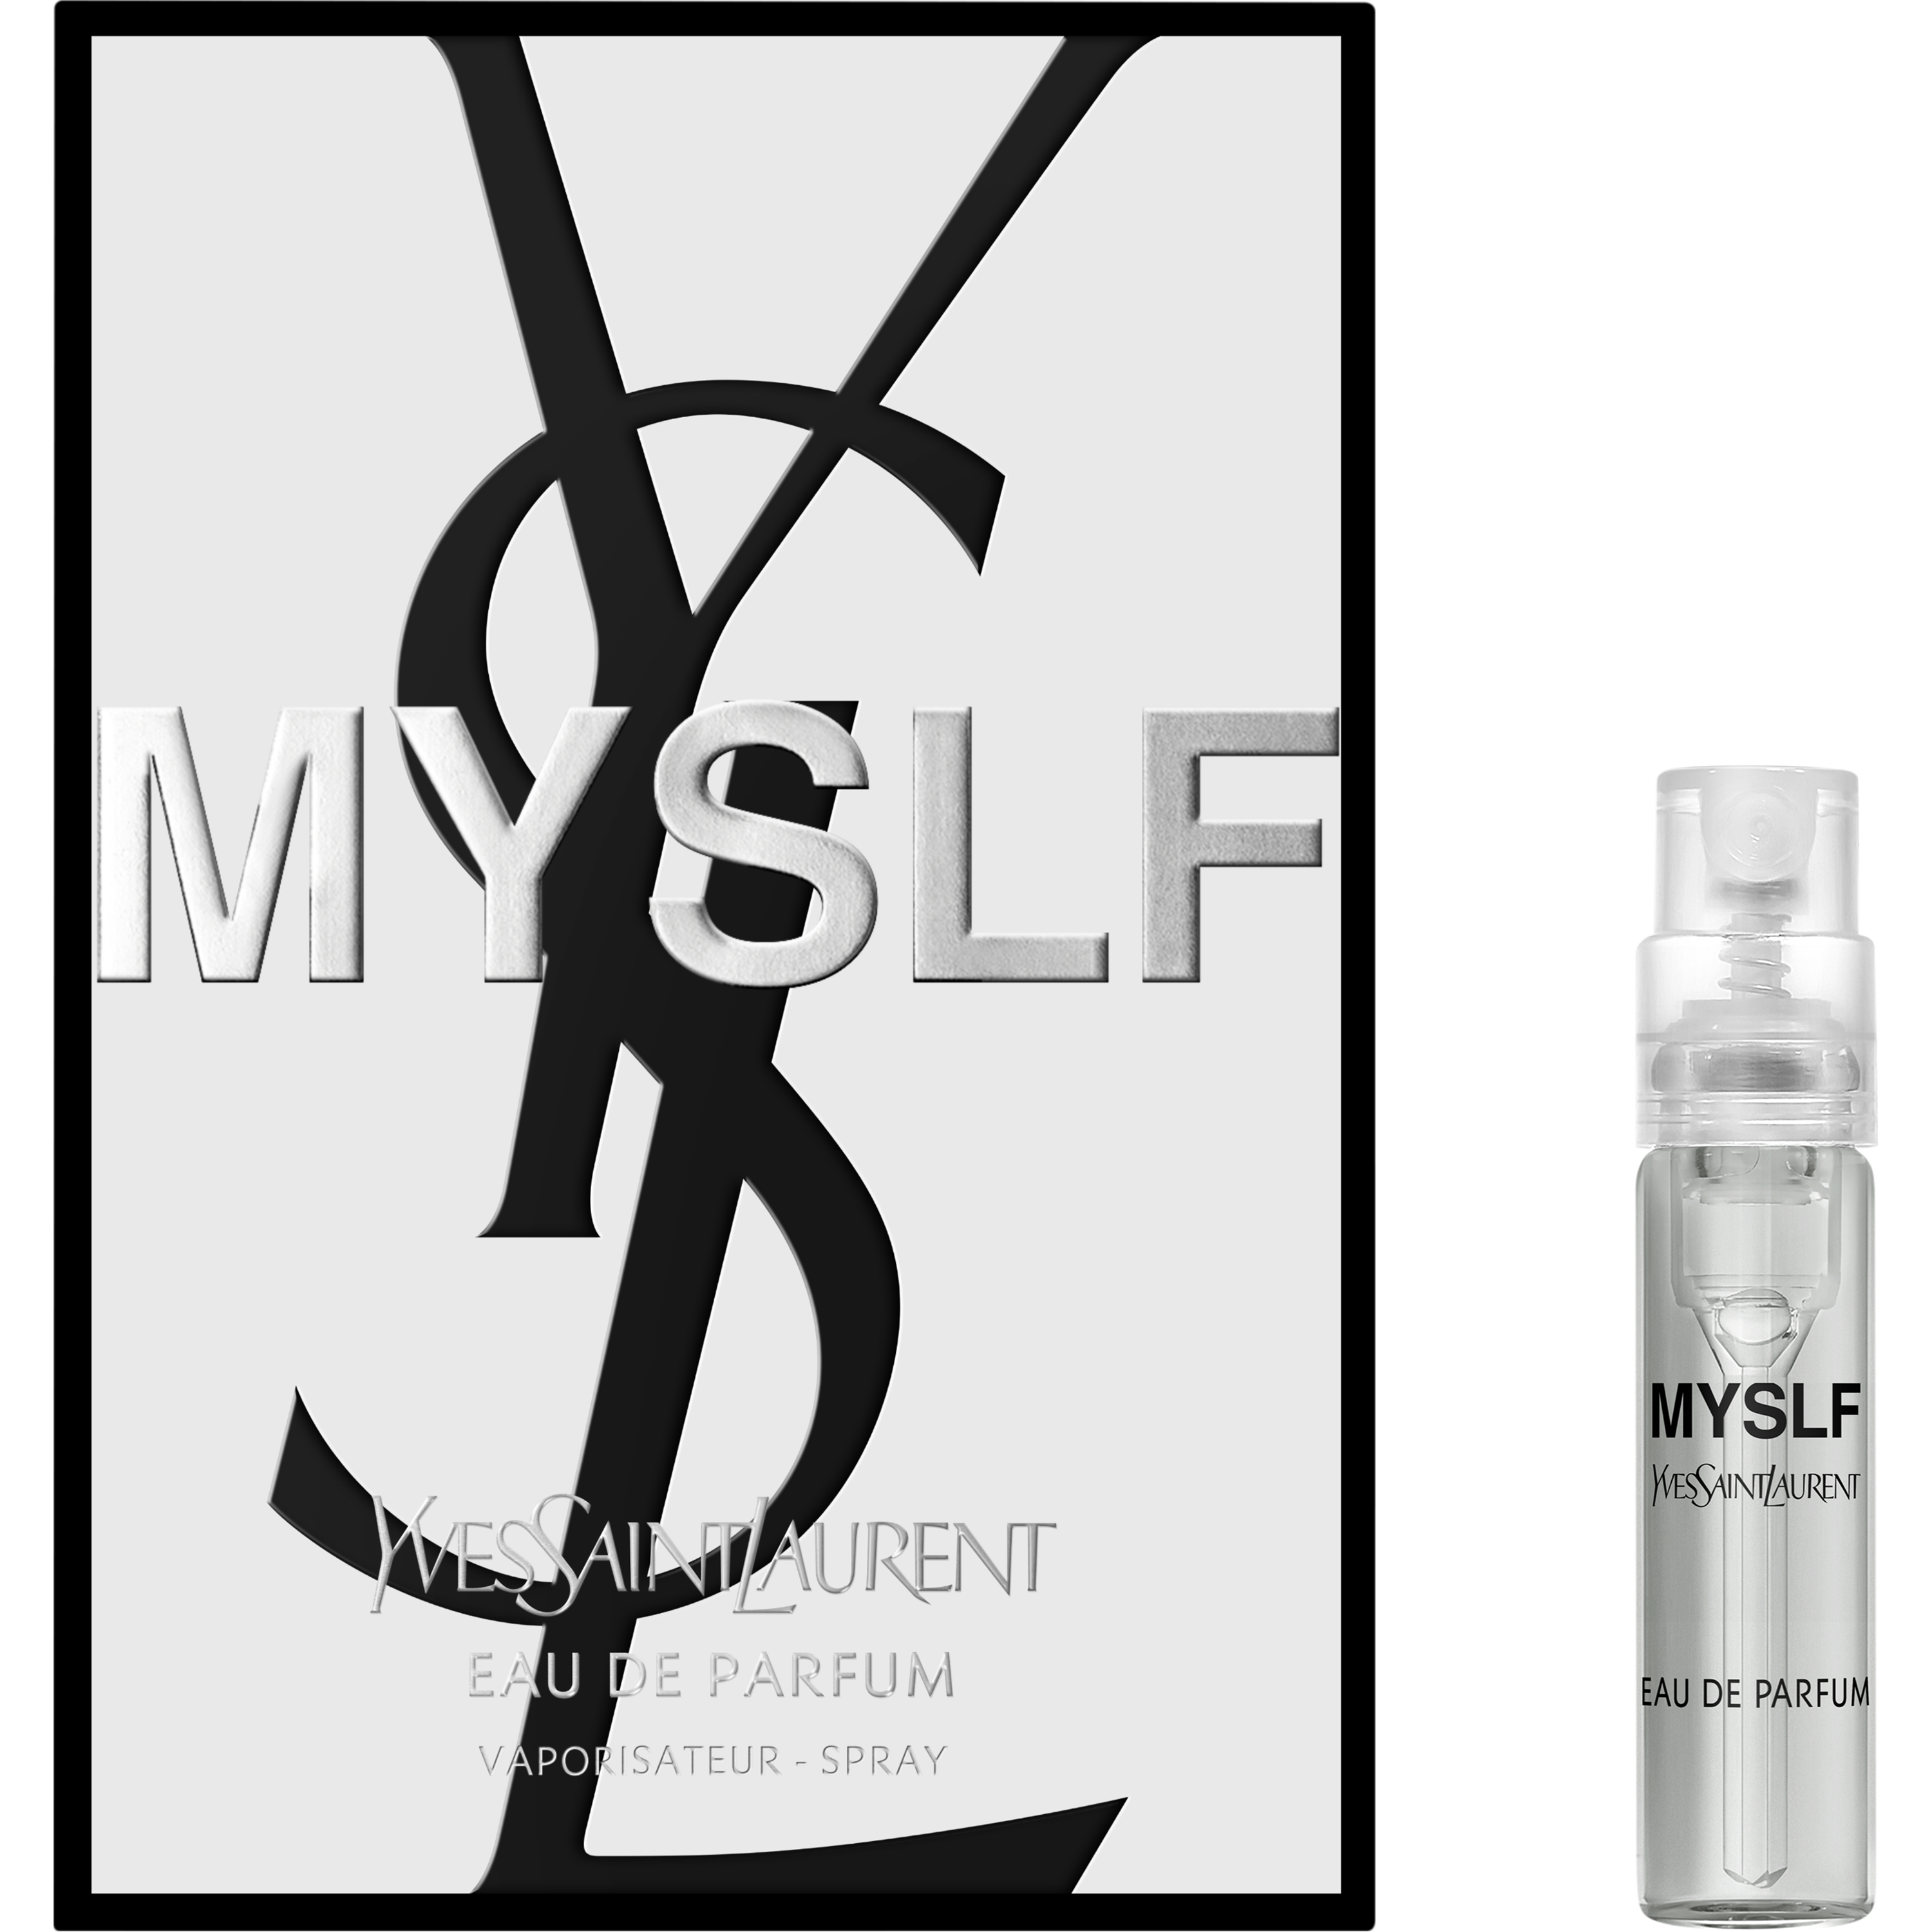 Purchase YSL MYSLF and receive sample size to try